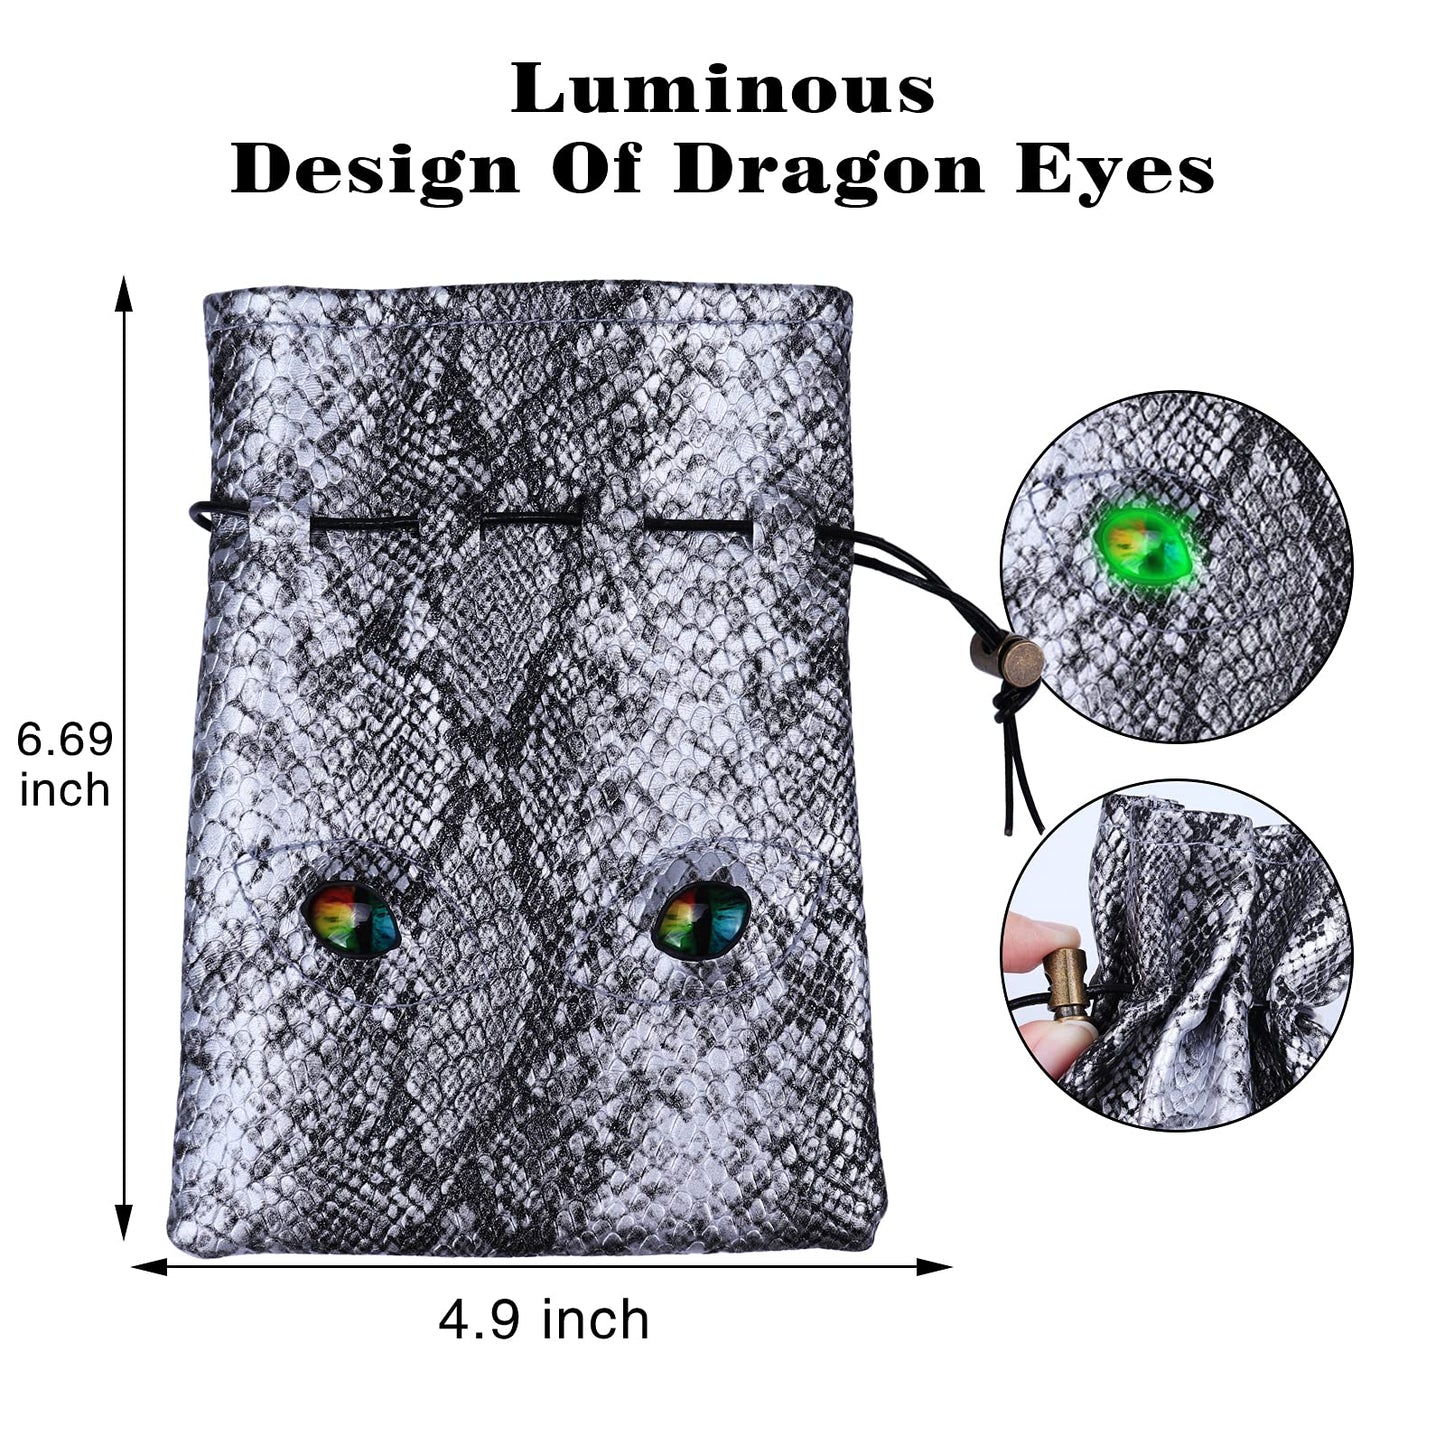 120PCS Metal Coins Gold, Silver and Copper & Dragon Luminous Eyes Leather Bag, Fake Coins for DND, Fantasy Coins for Games Tokens, RPG Games Accessories for Board Games Dungeons and Dragons